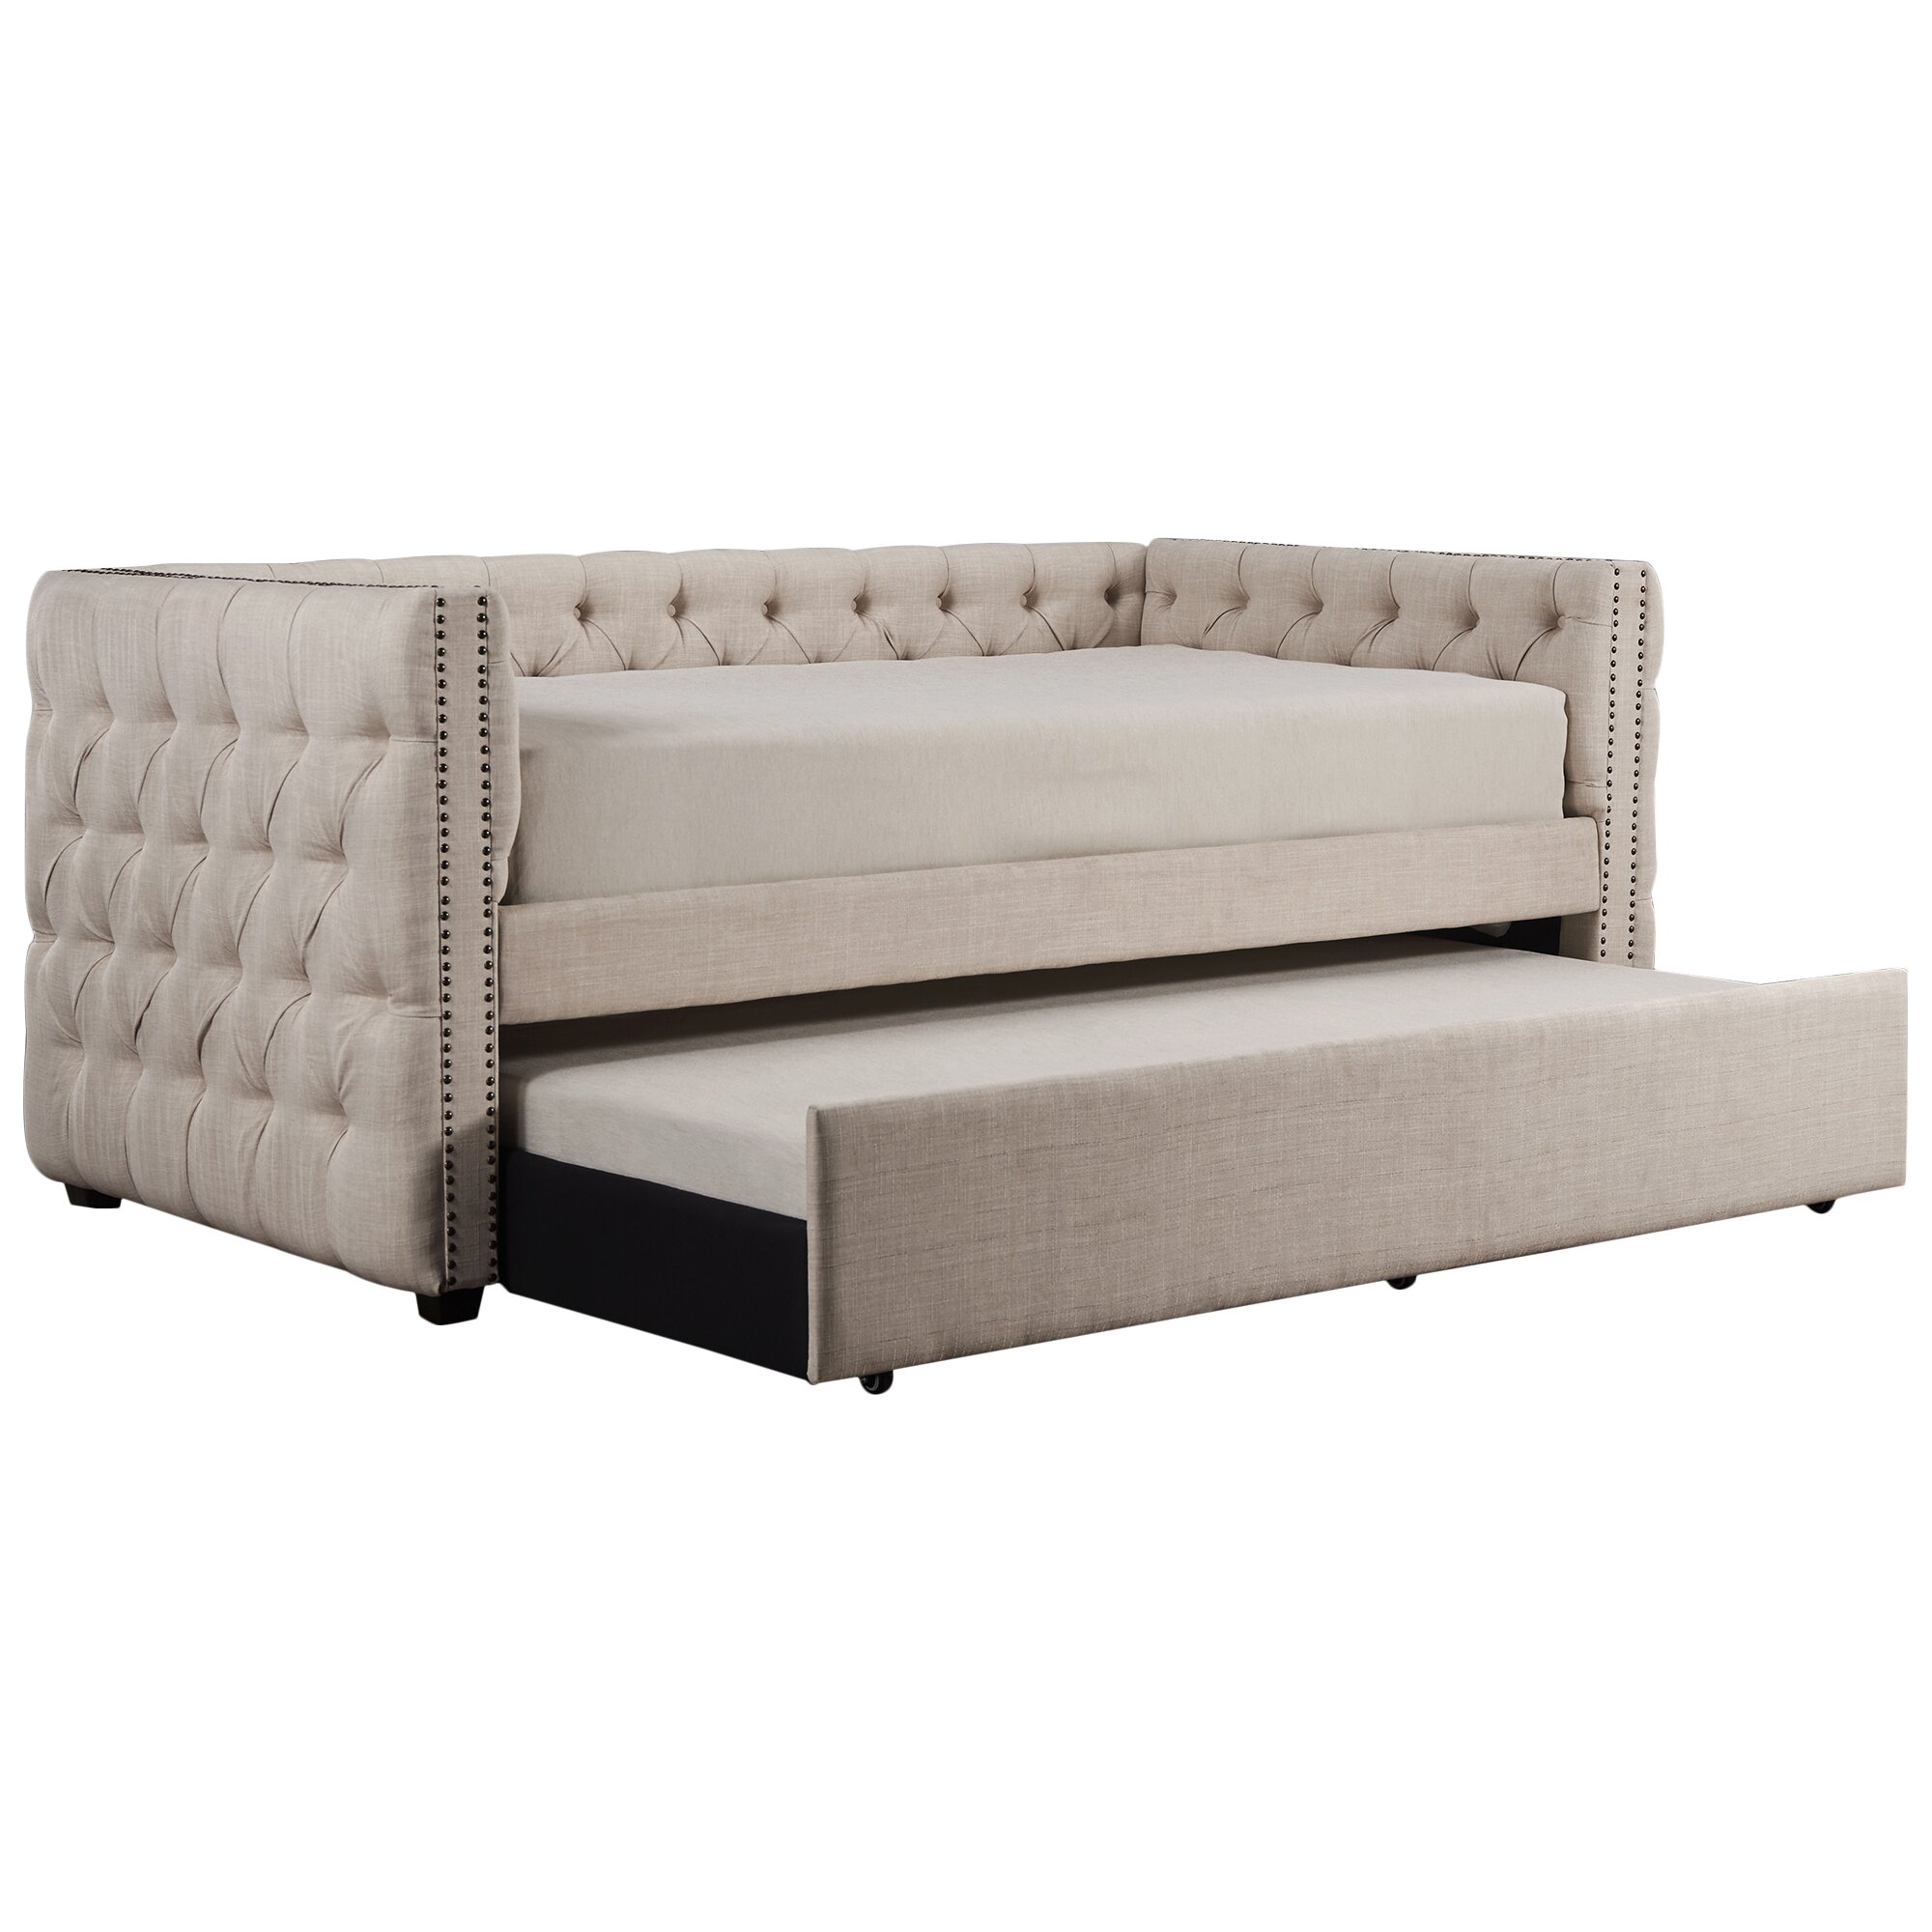 House of Hampton Ghislain Daybed with Trundle & Reviews | Wayfair.ca